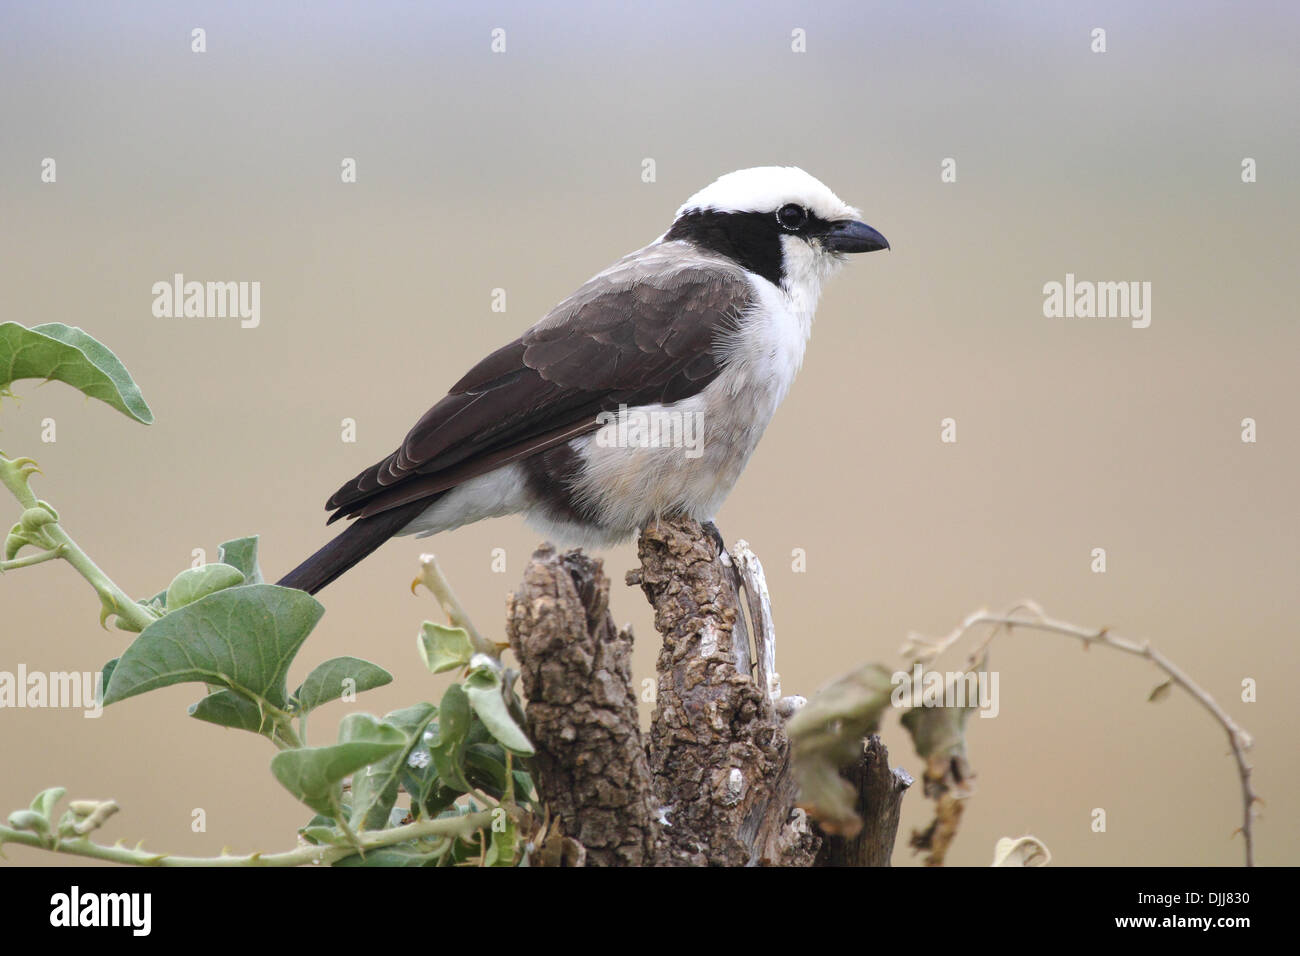 A Northern White-crowned Shrike, or White-rumped Shrike, (Eurocephalus rueppelli) perched on a branch Stock Photo